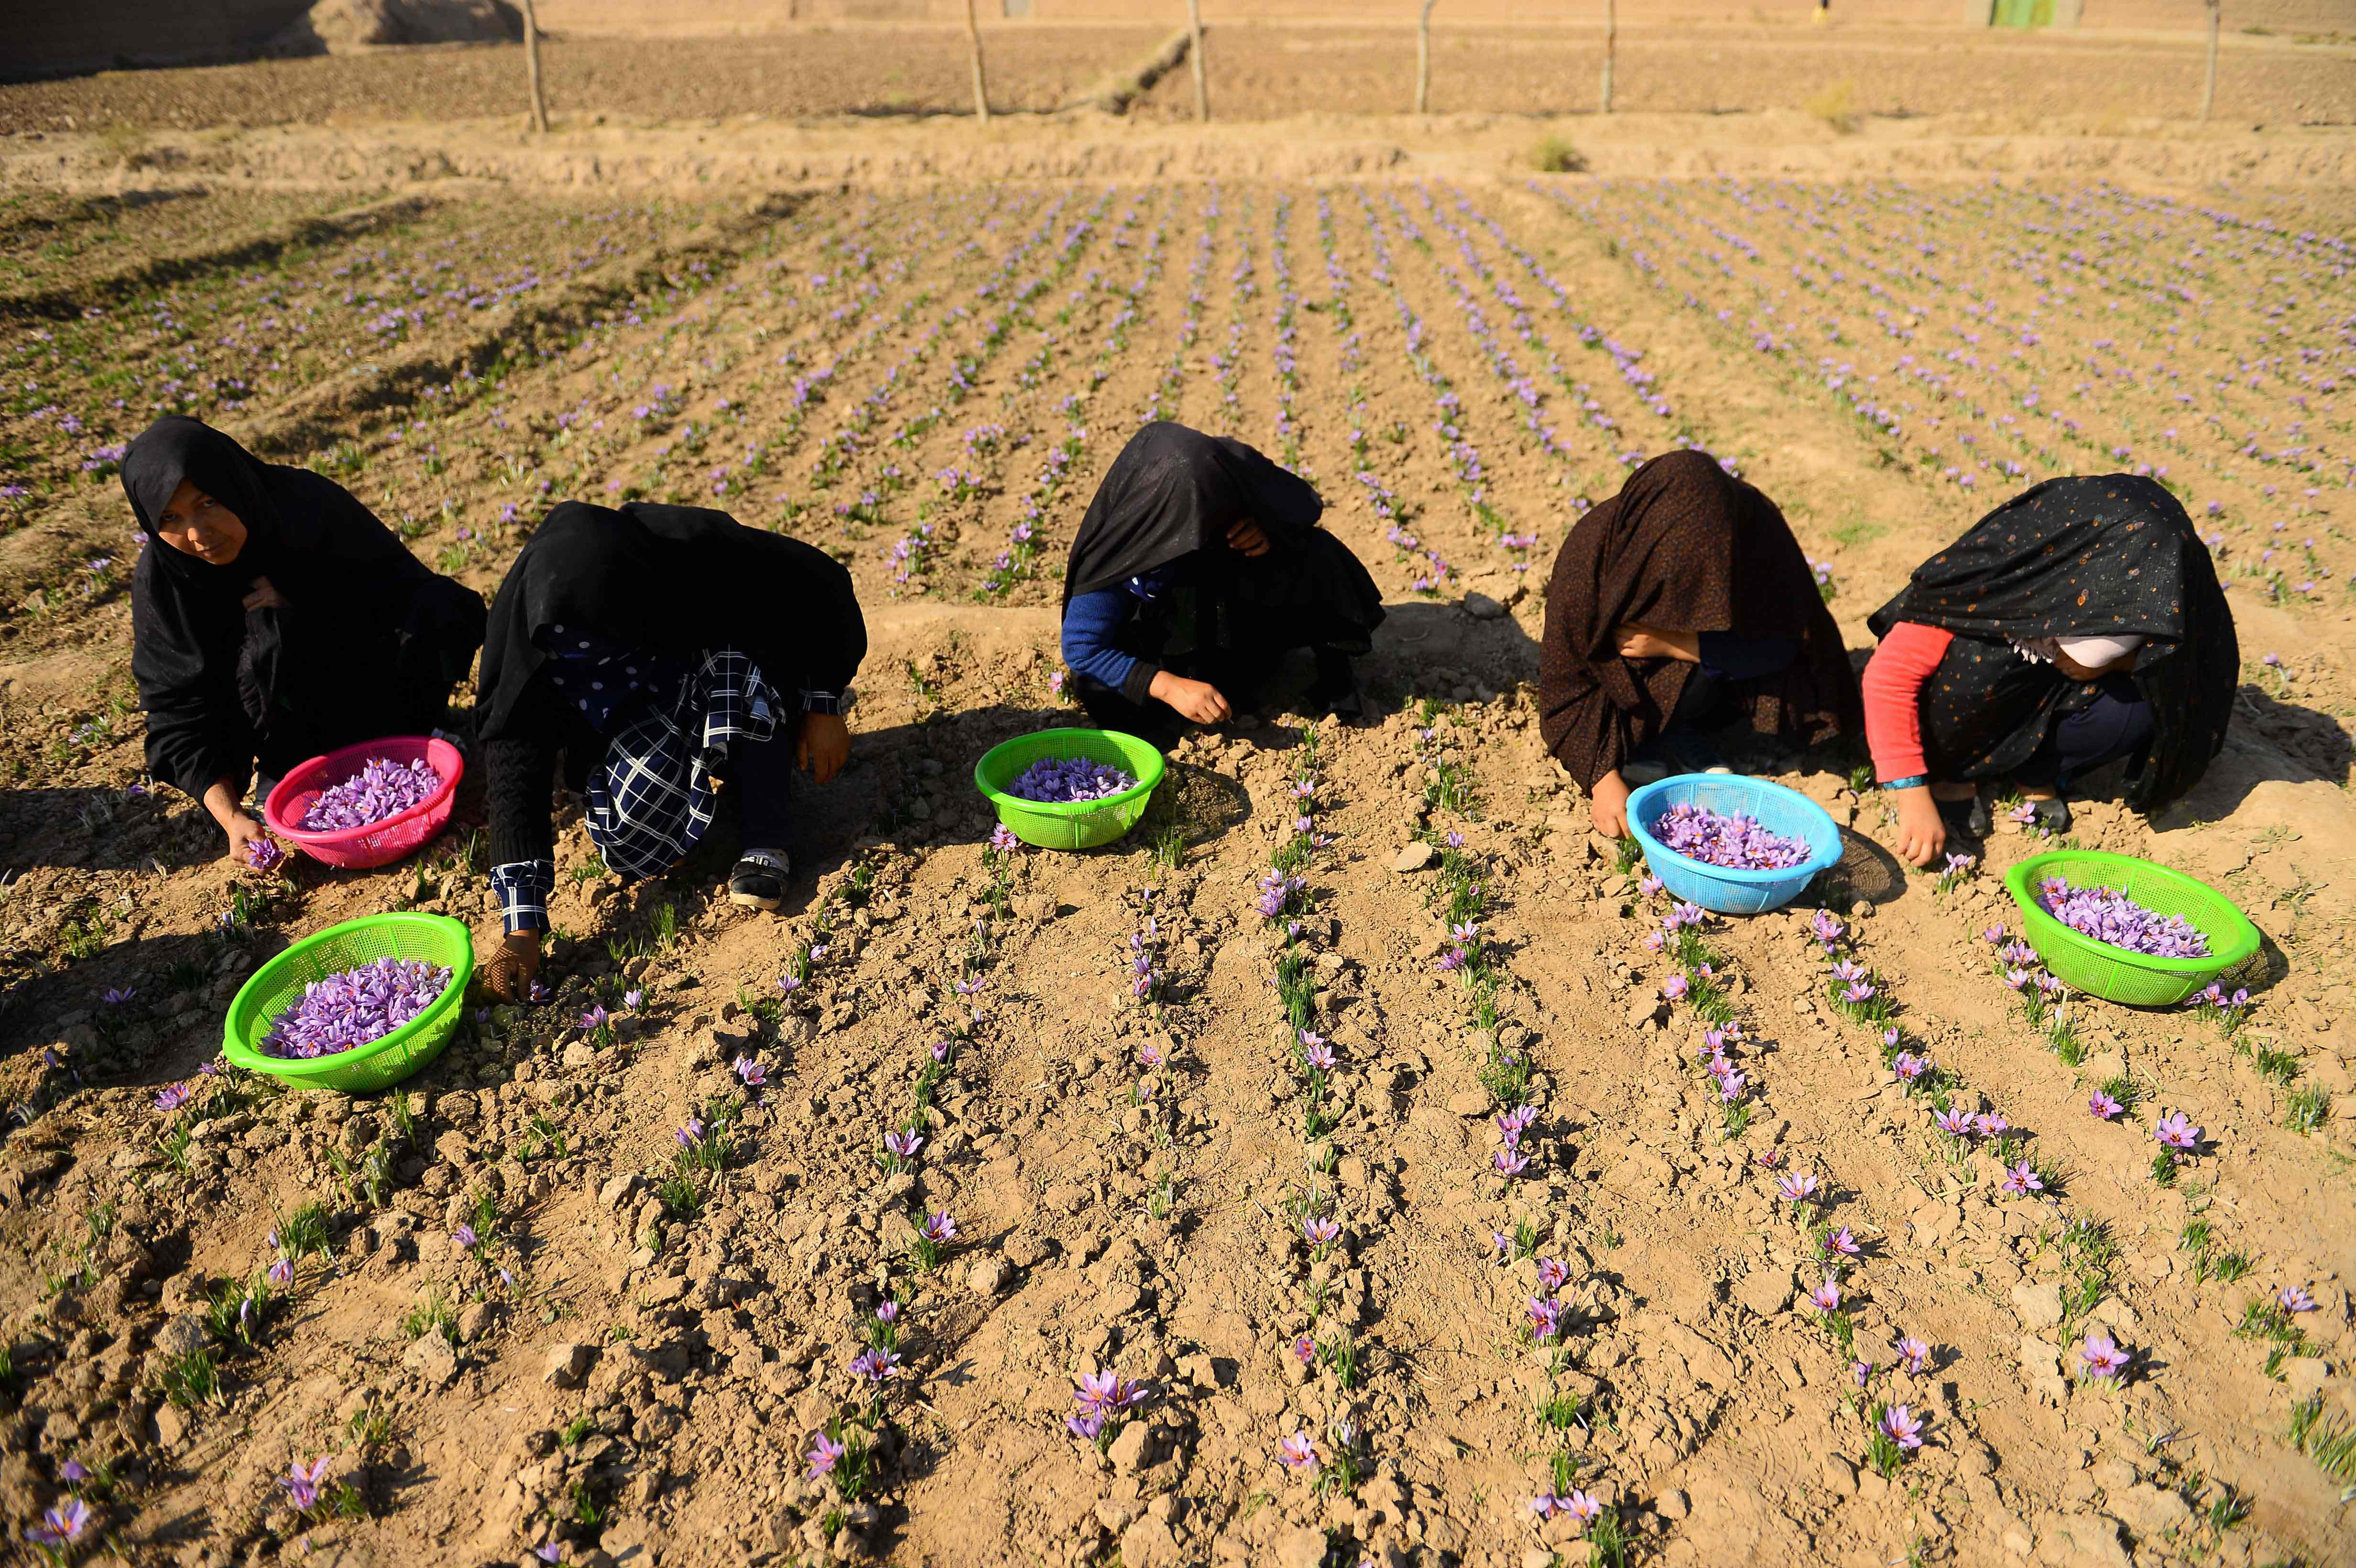 Afghan women harvest saffron flowers in a field on the outskirts of Herat province, November 2018 (Photo: Reuters)